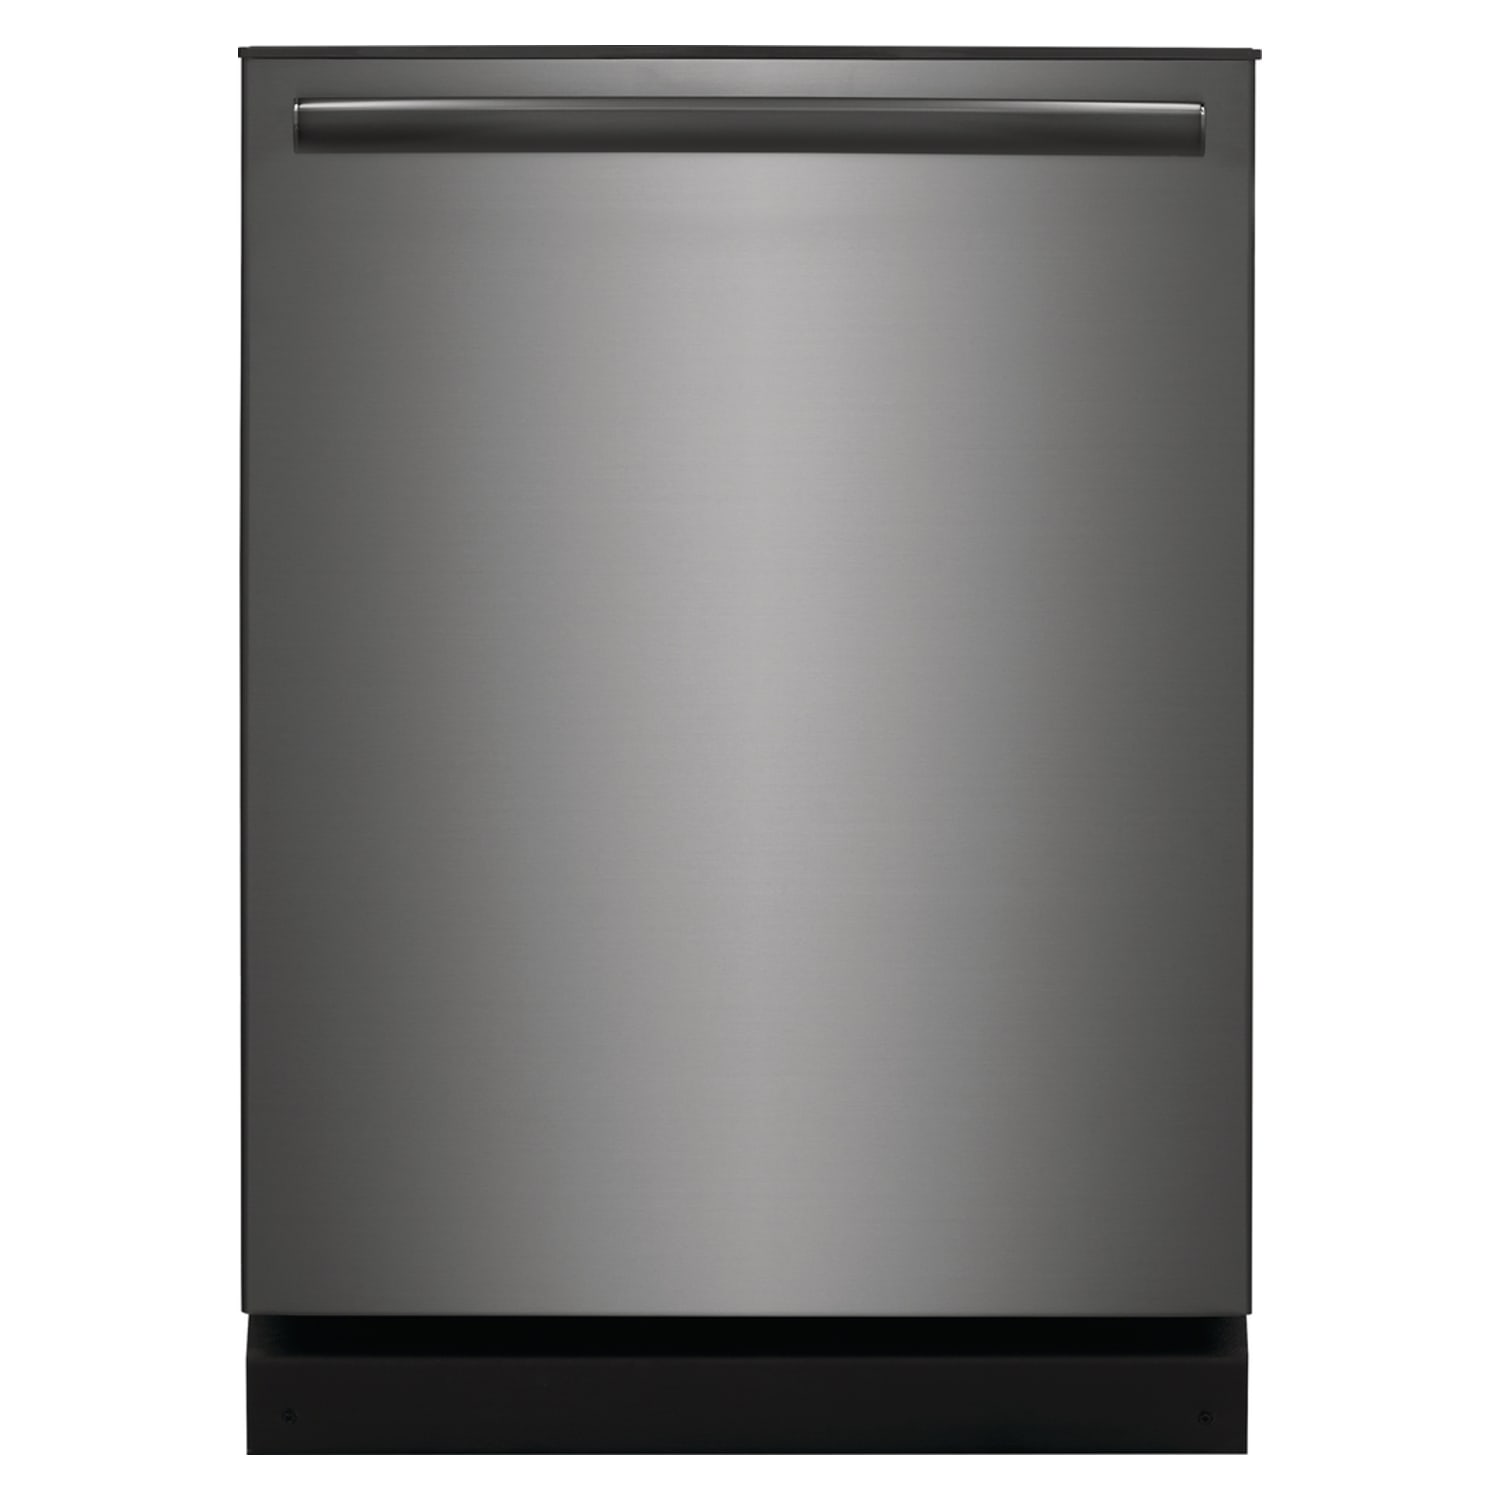 Frigidaire Gallery 24” Built-In Black Stainless Steel Dishwasher - GDPH4515AD